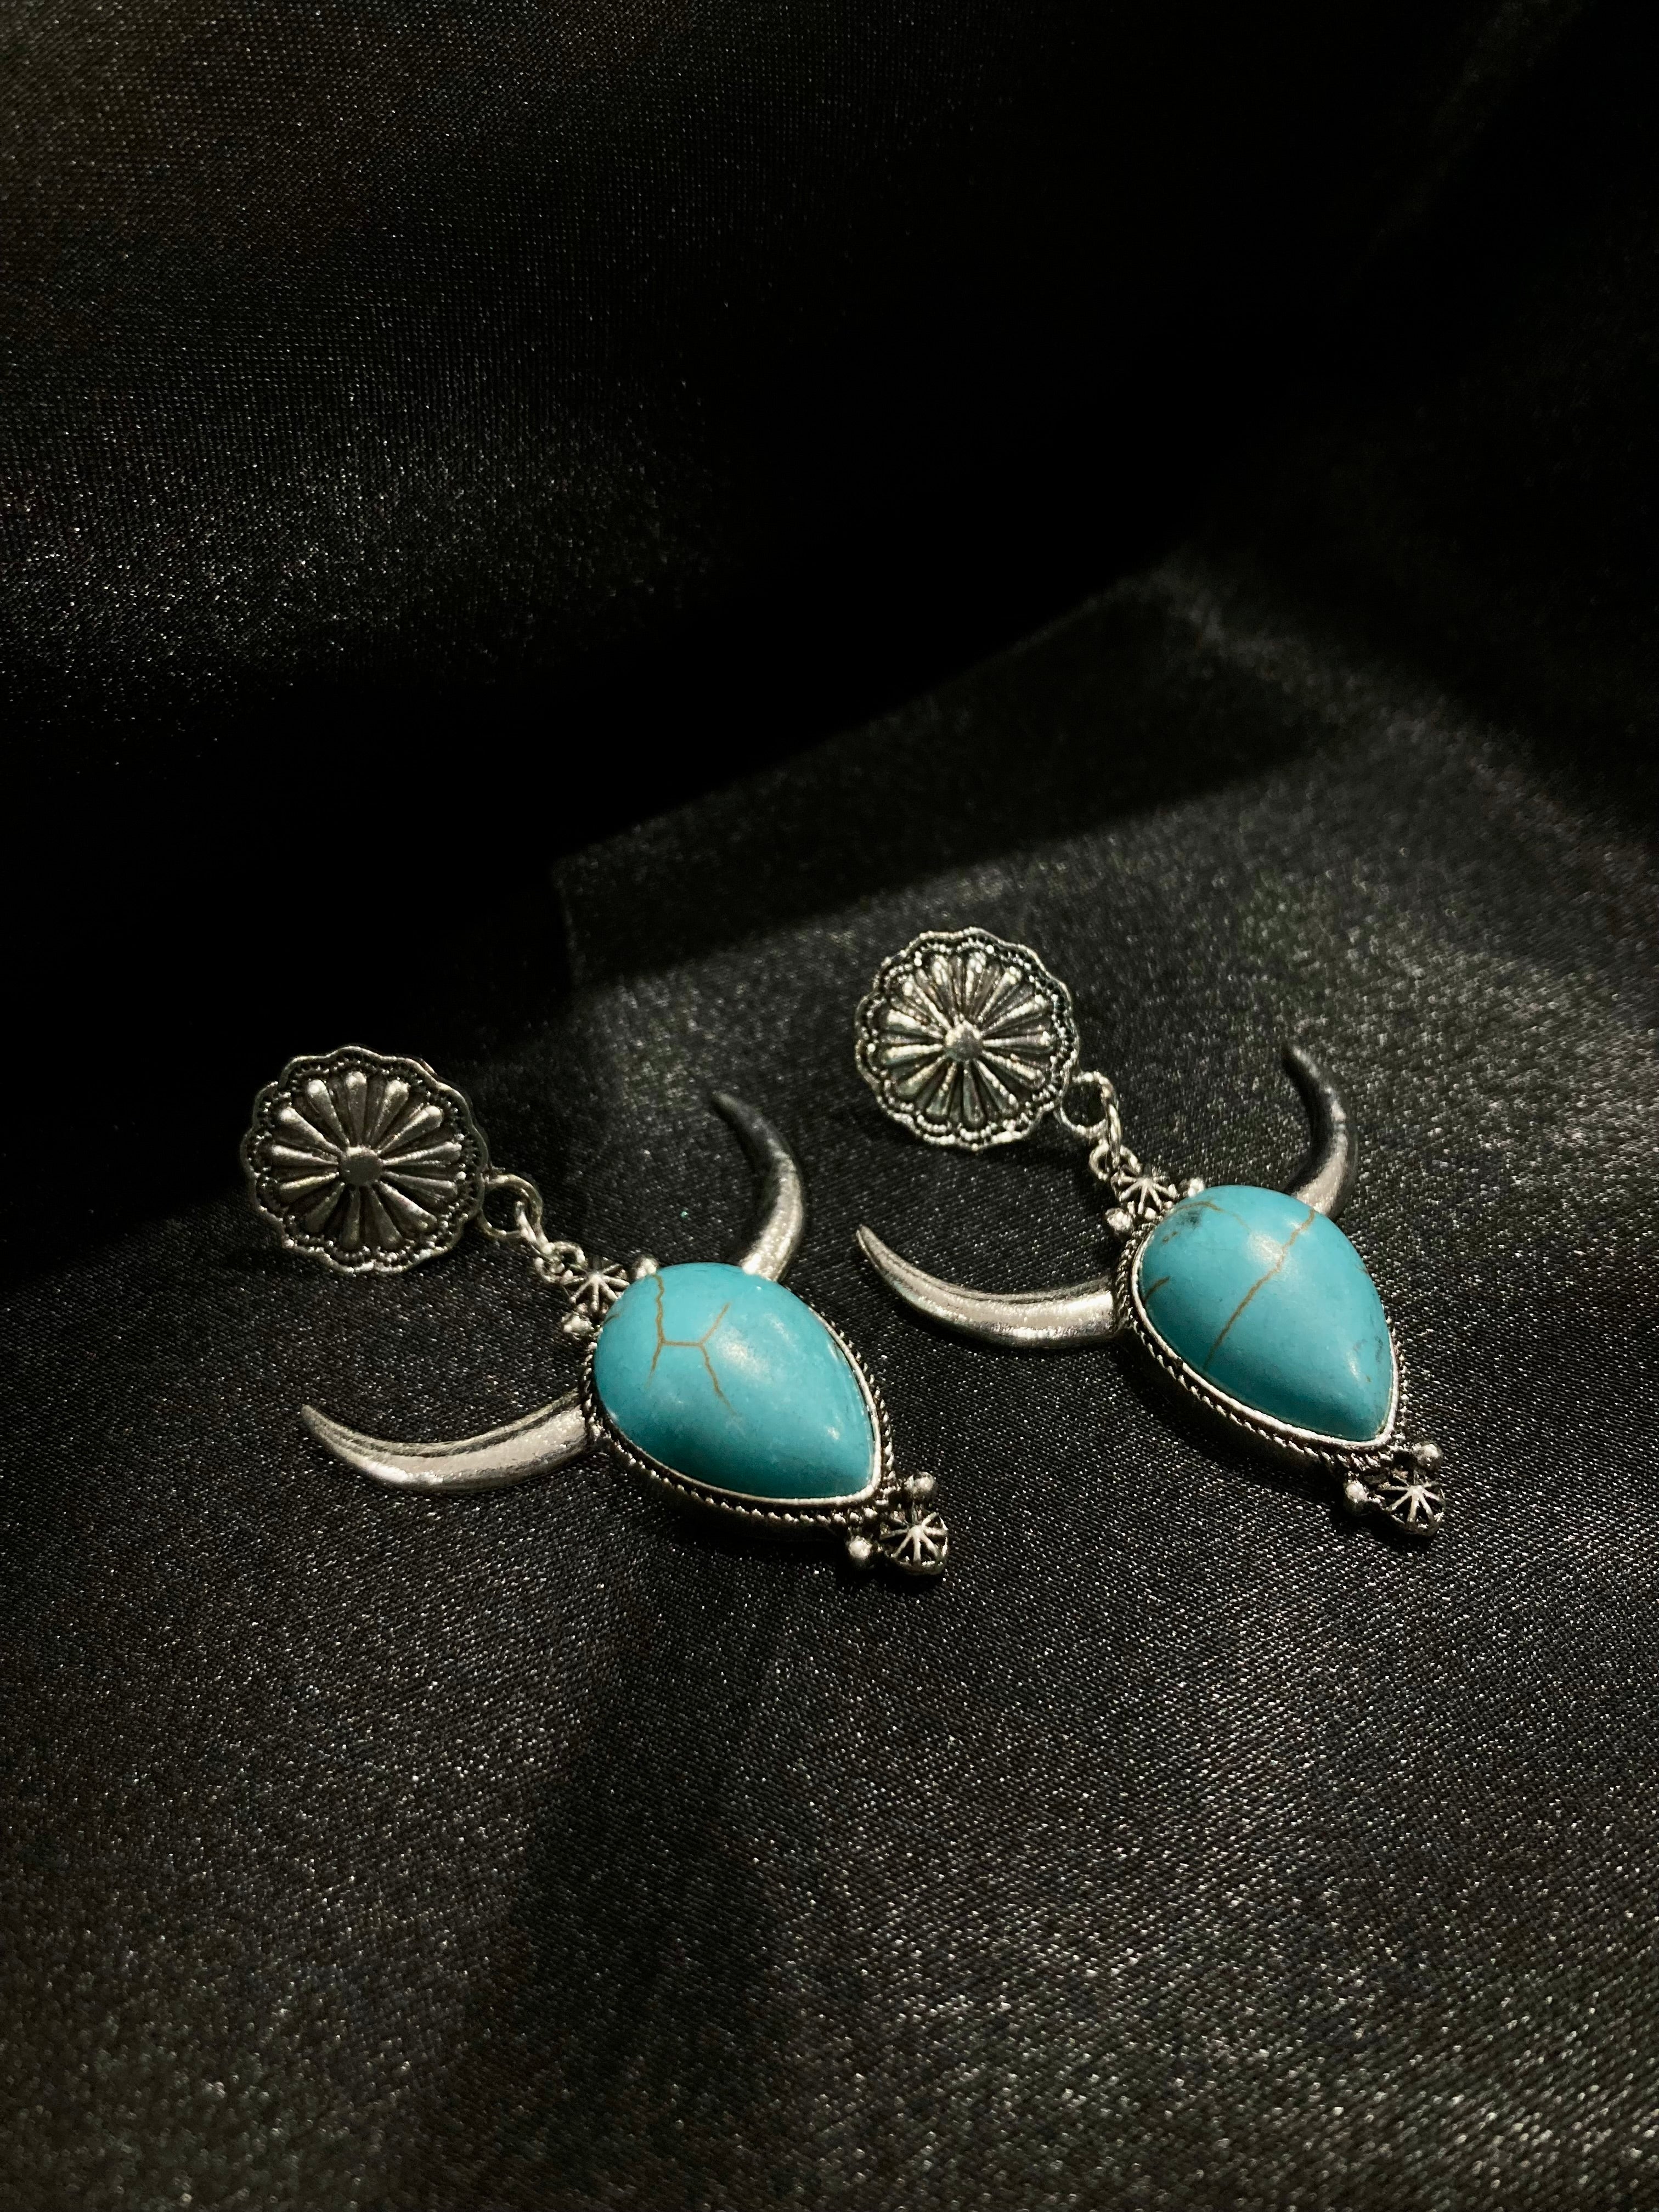 Boho Silver Cow Horn Earrings with Turquoise Stone